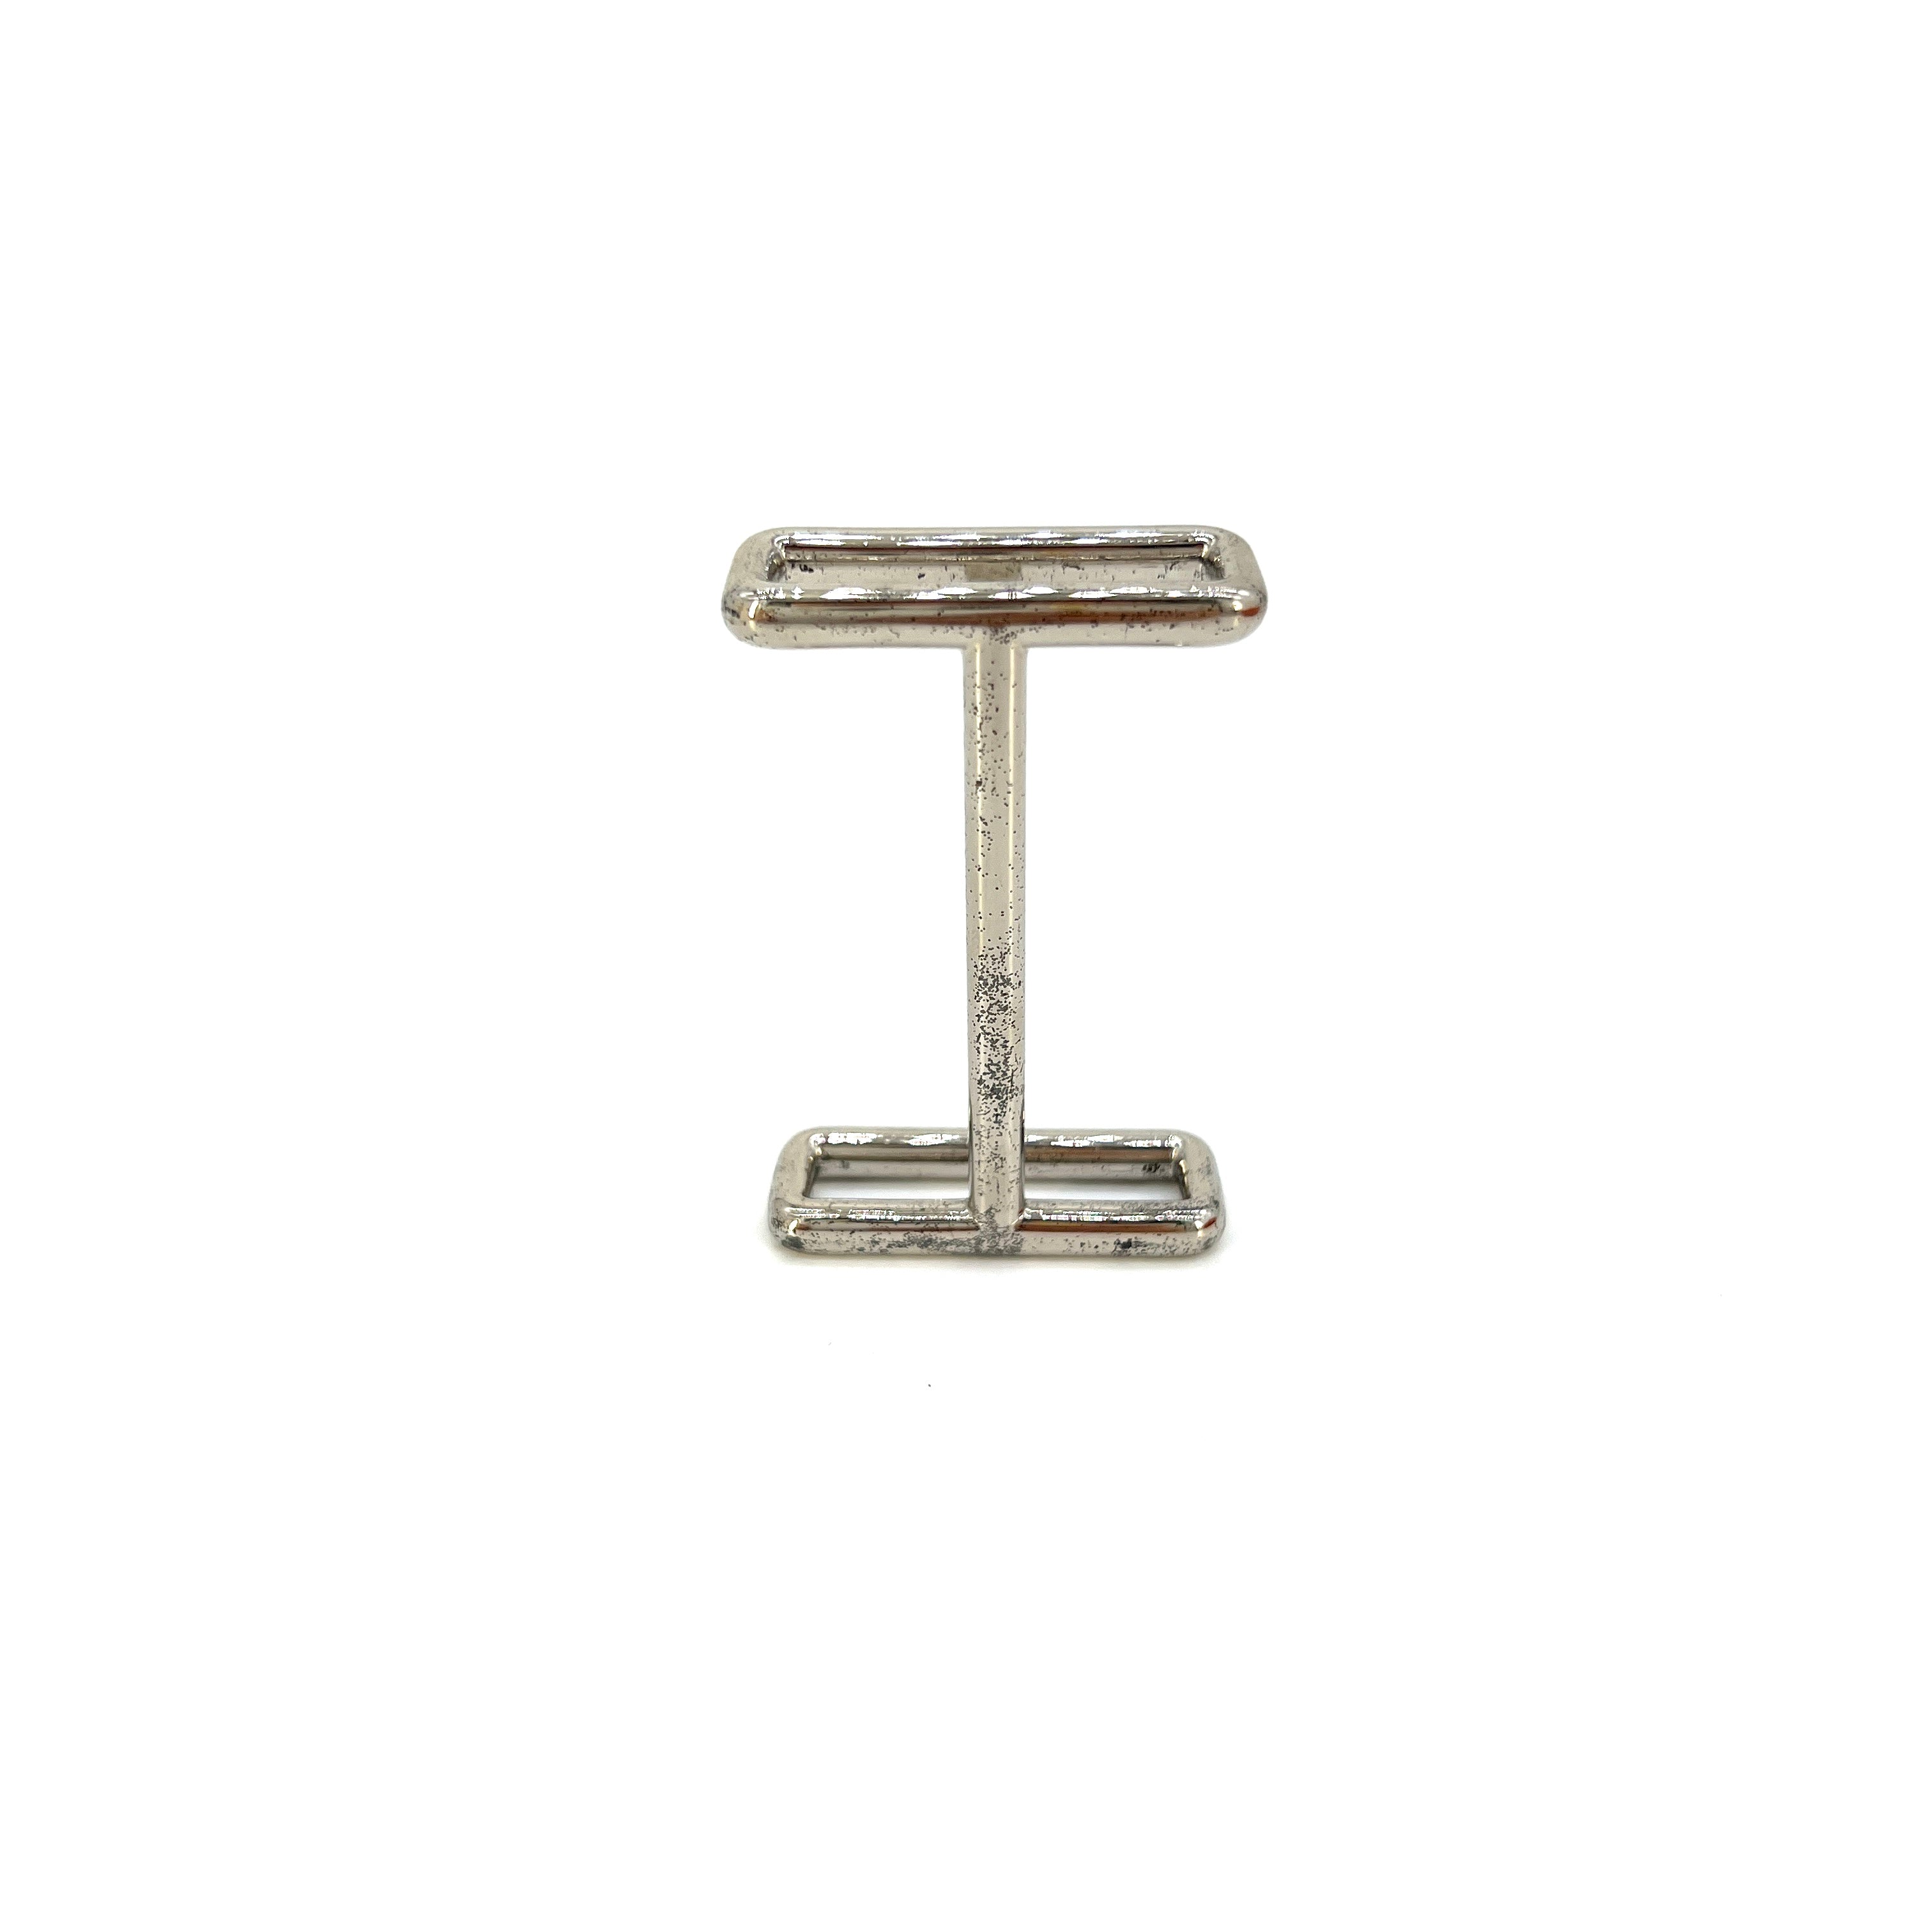 Hermes H Buckle Silver [Guaranteed Authentic]